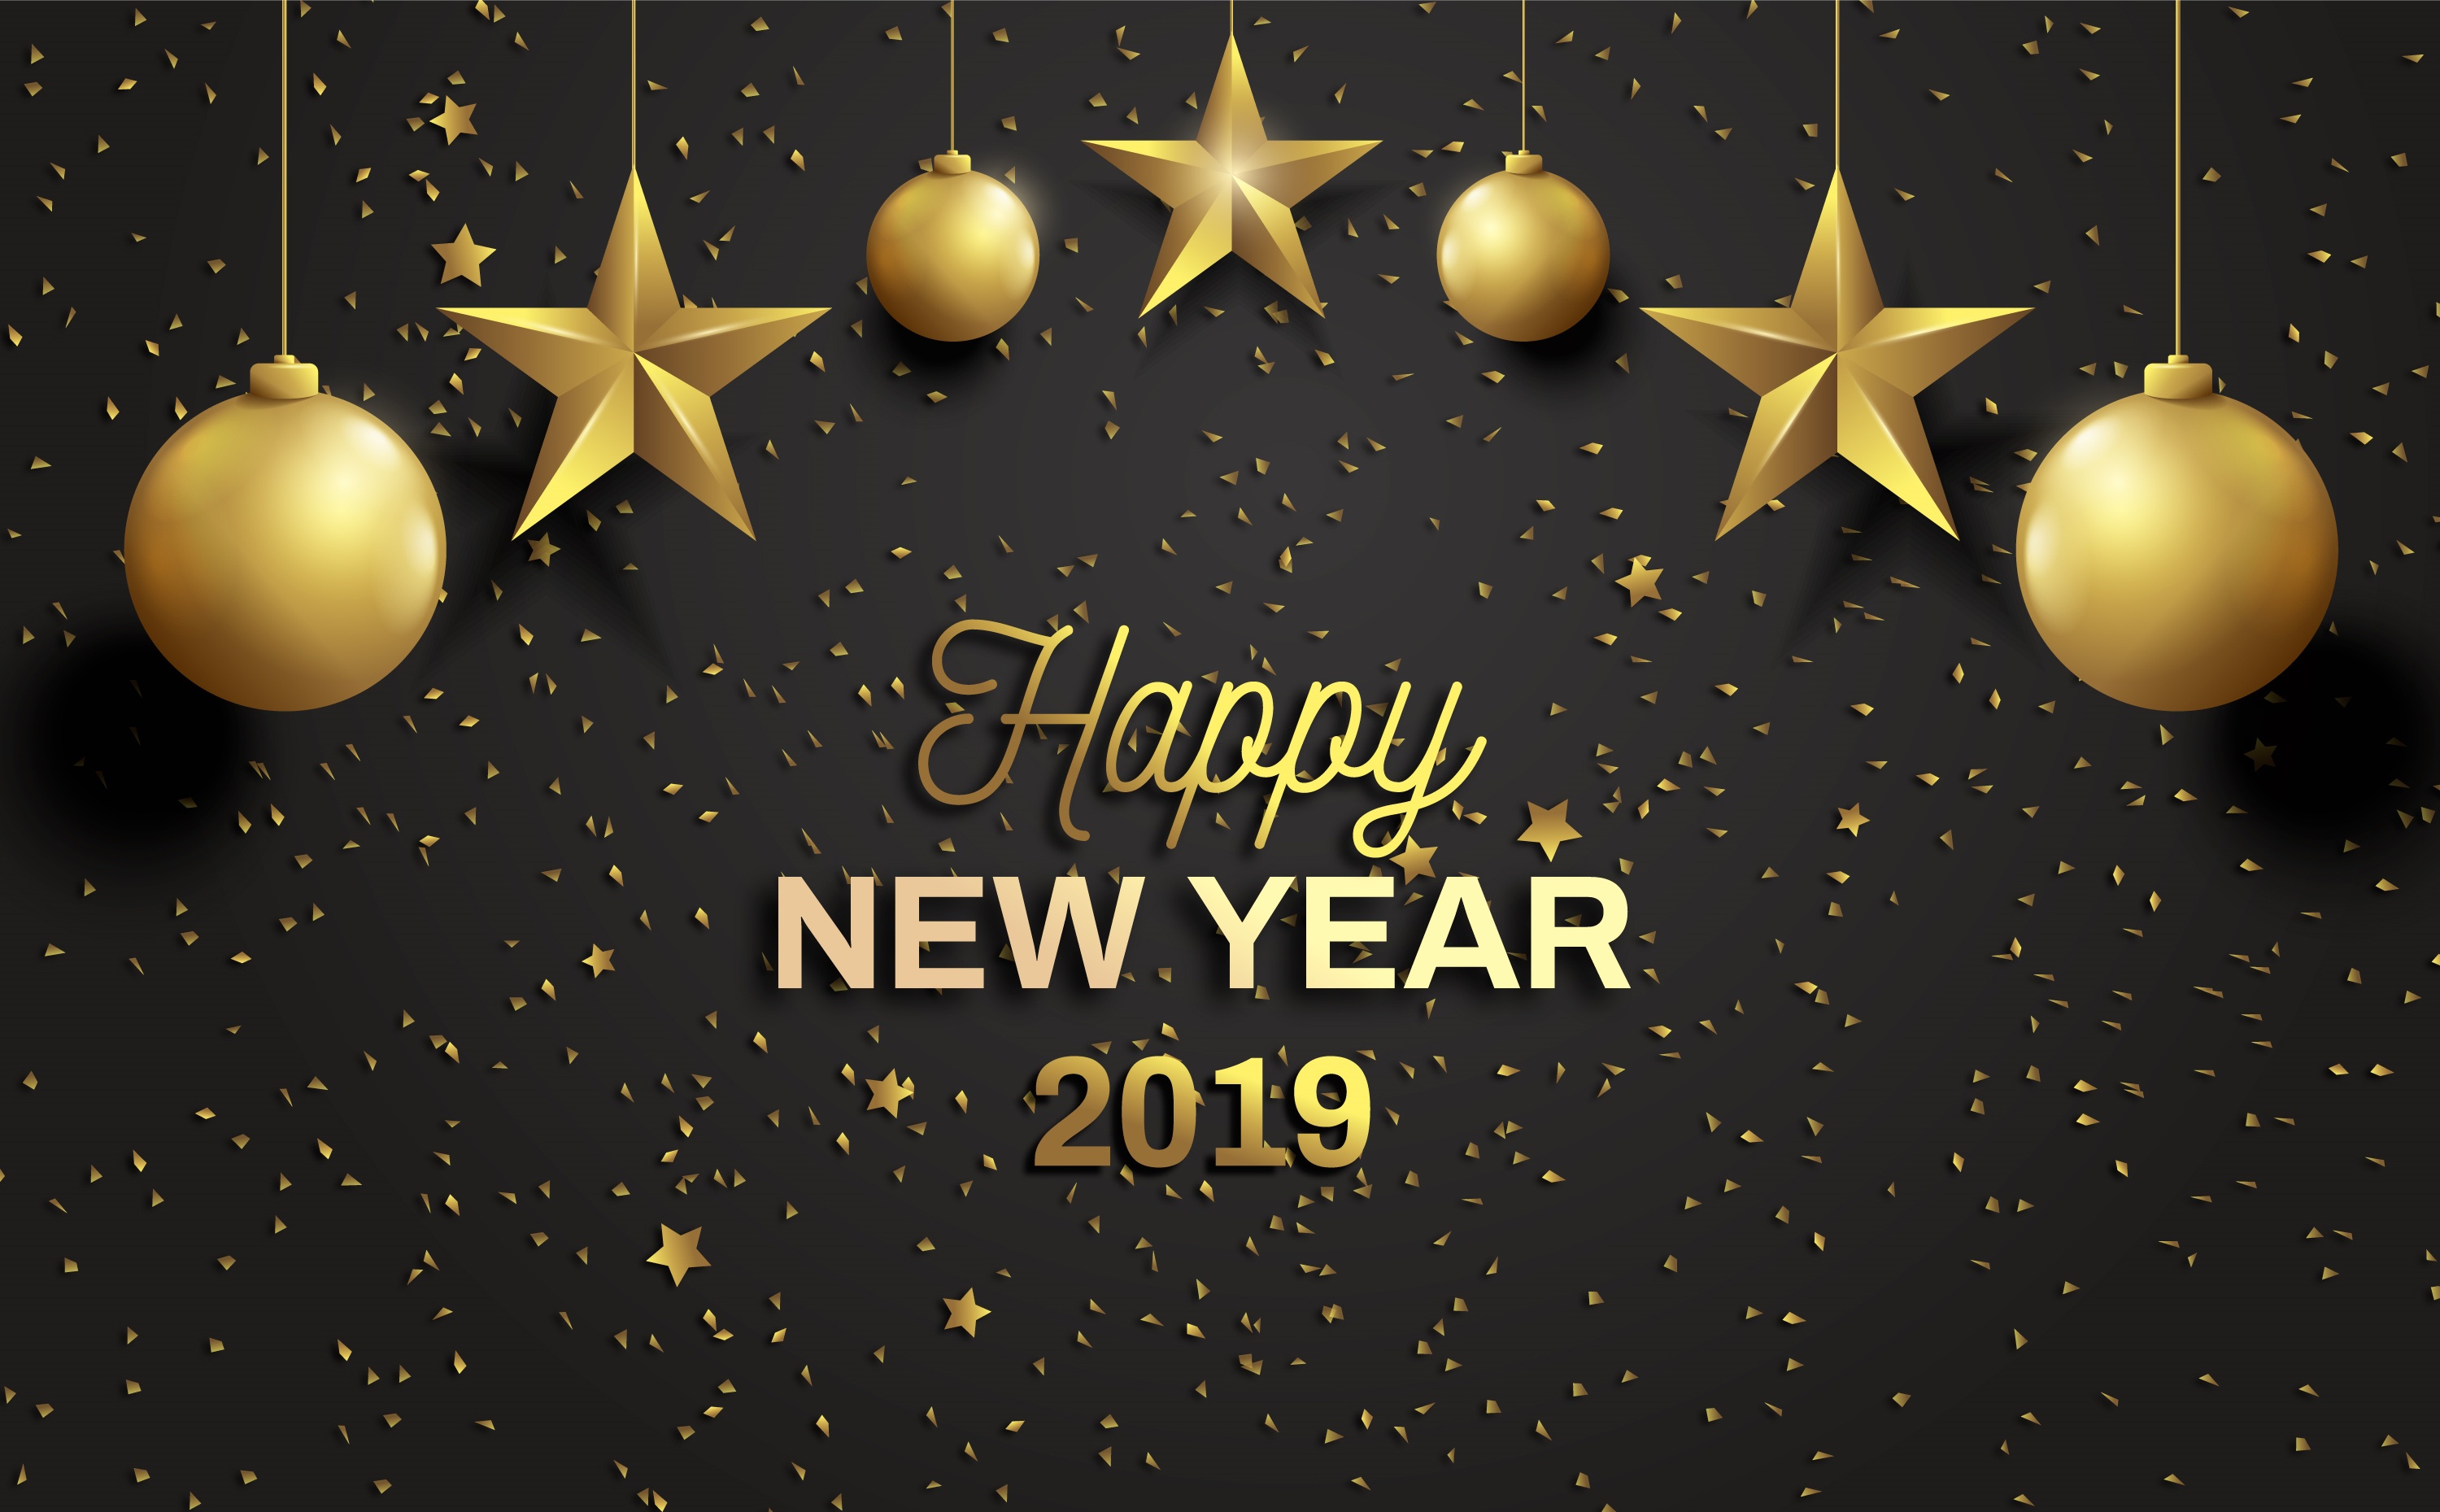 Wallpaper Of Happy New Year, New Year 2019 Background - Happy New Year Greetings - HD Wallpaper 